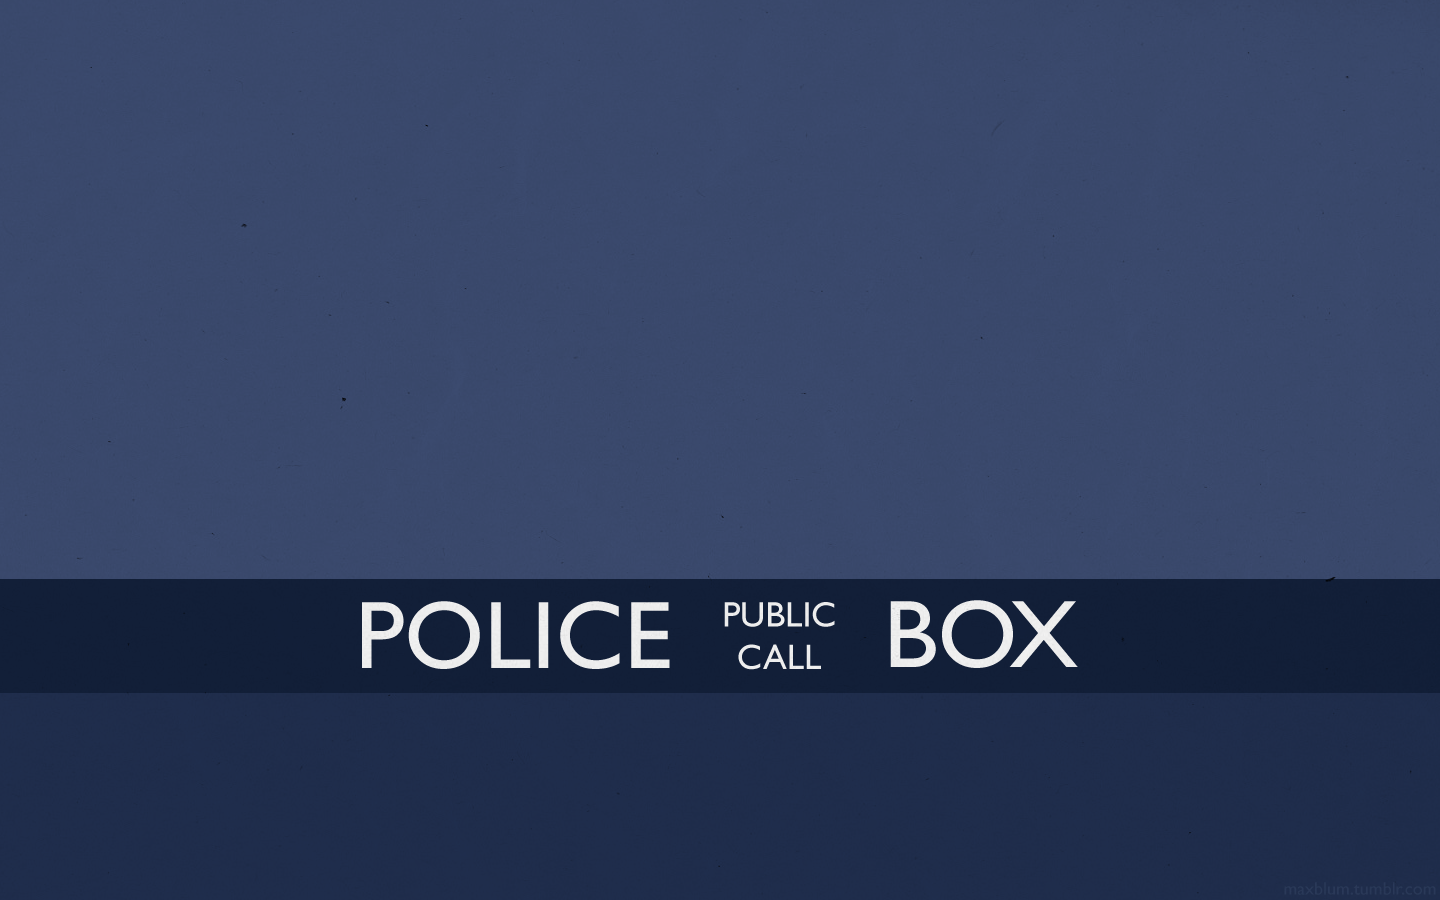 General 1440x900 Doctor Who TARDIS minimalism blue TV series science fiction simple background